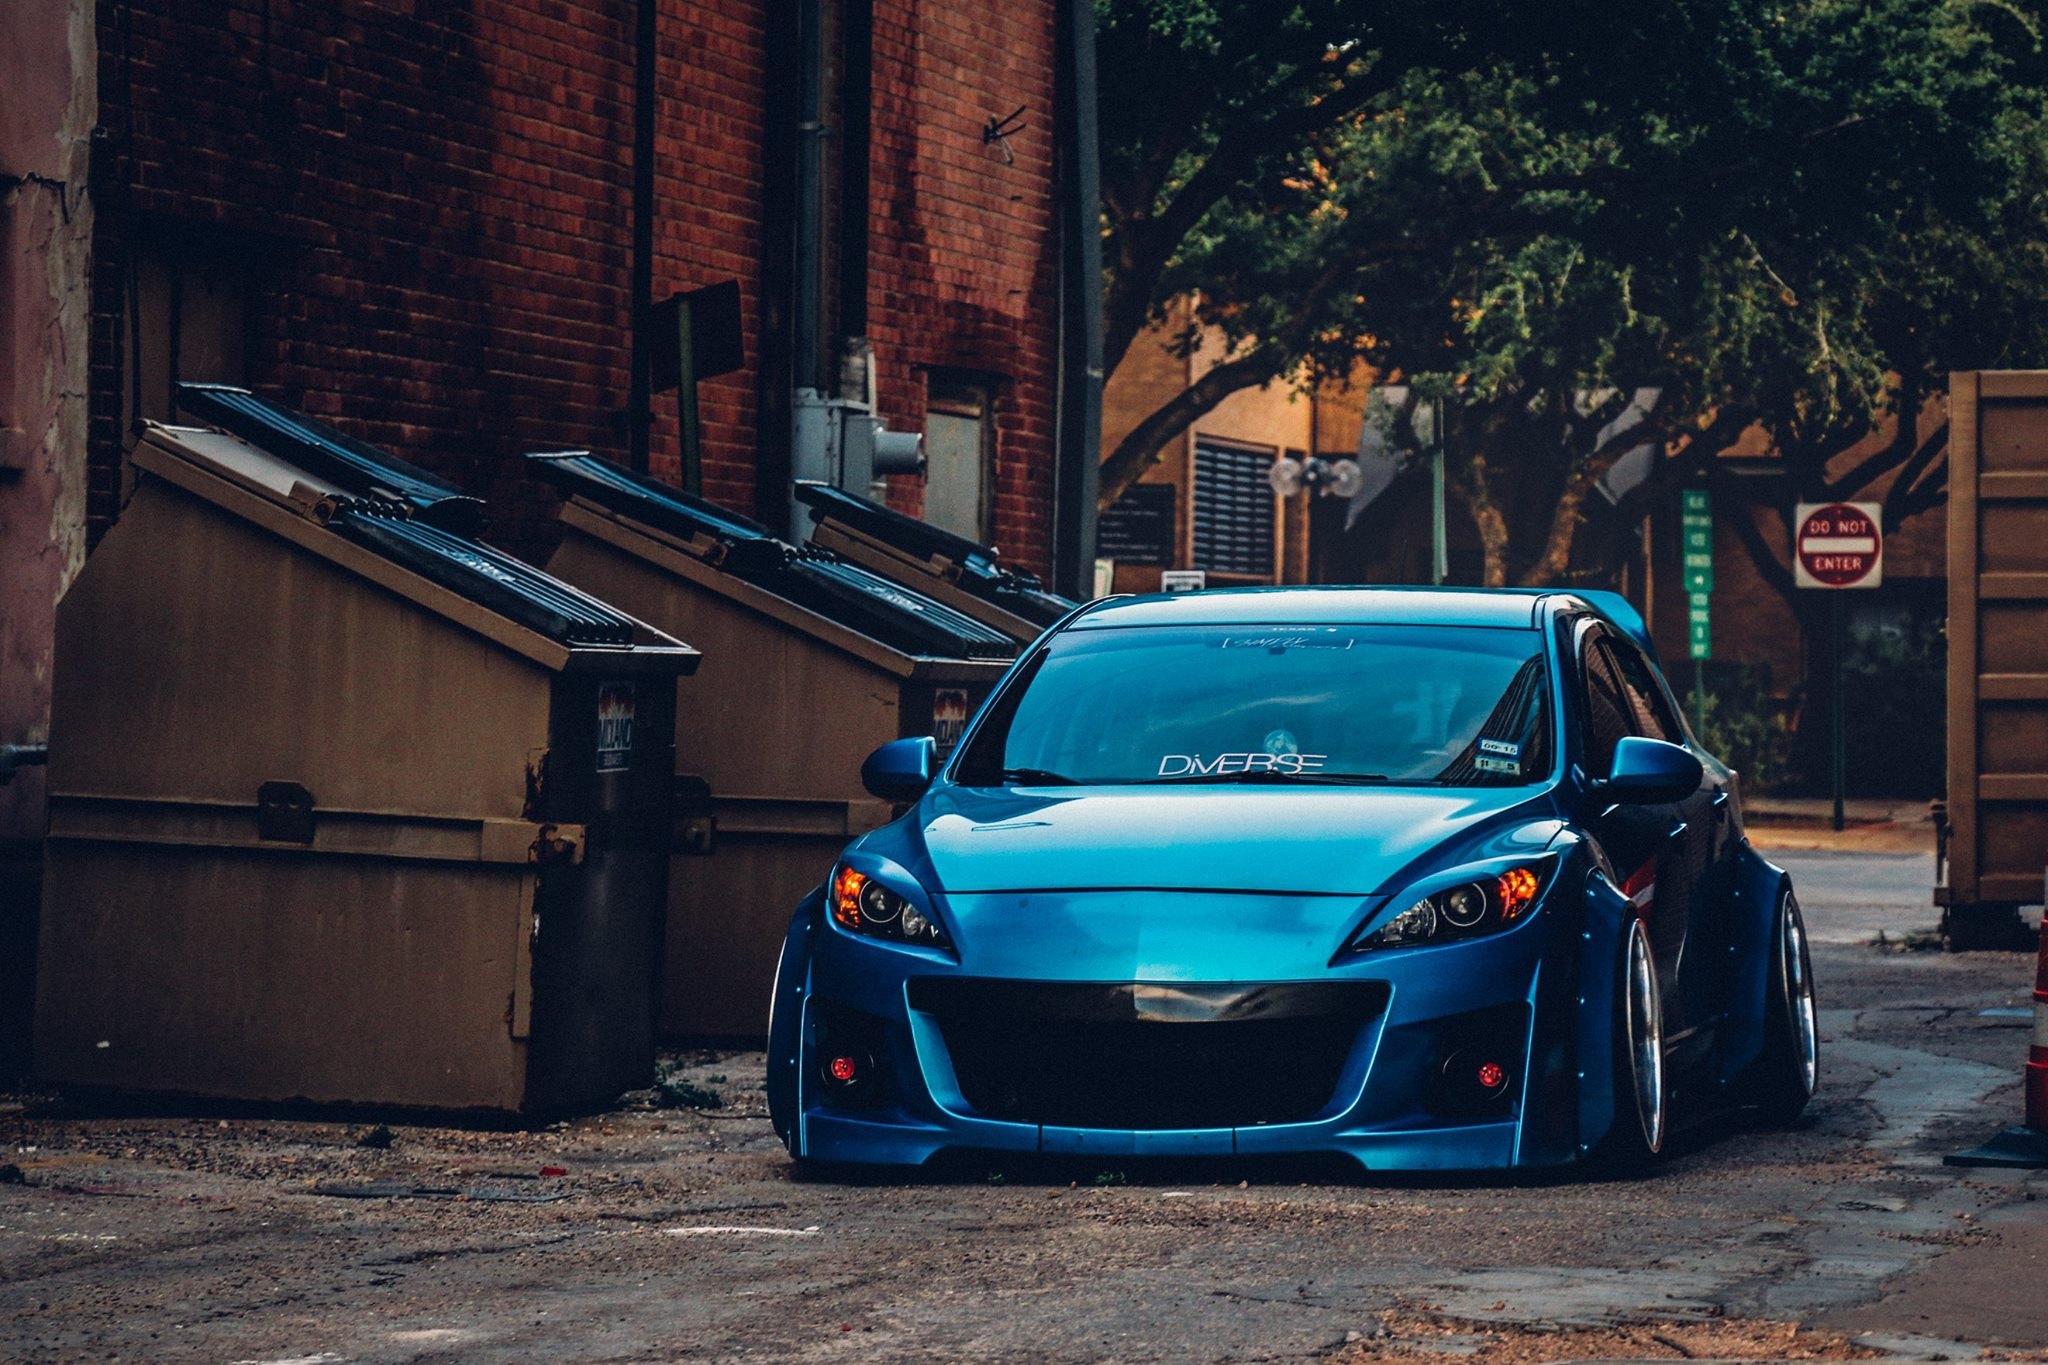 Aftermarket Halo Headlights on Blue Mazda 3 - Photo by Clinched